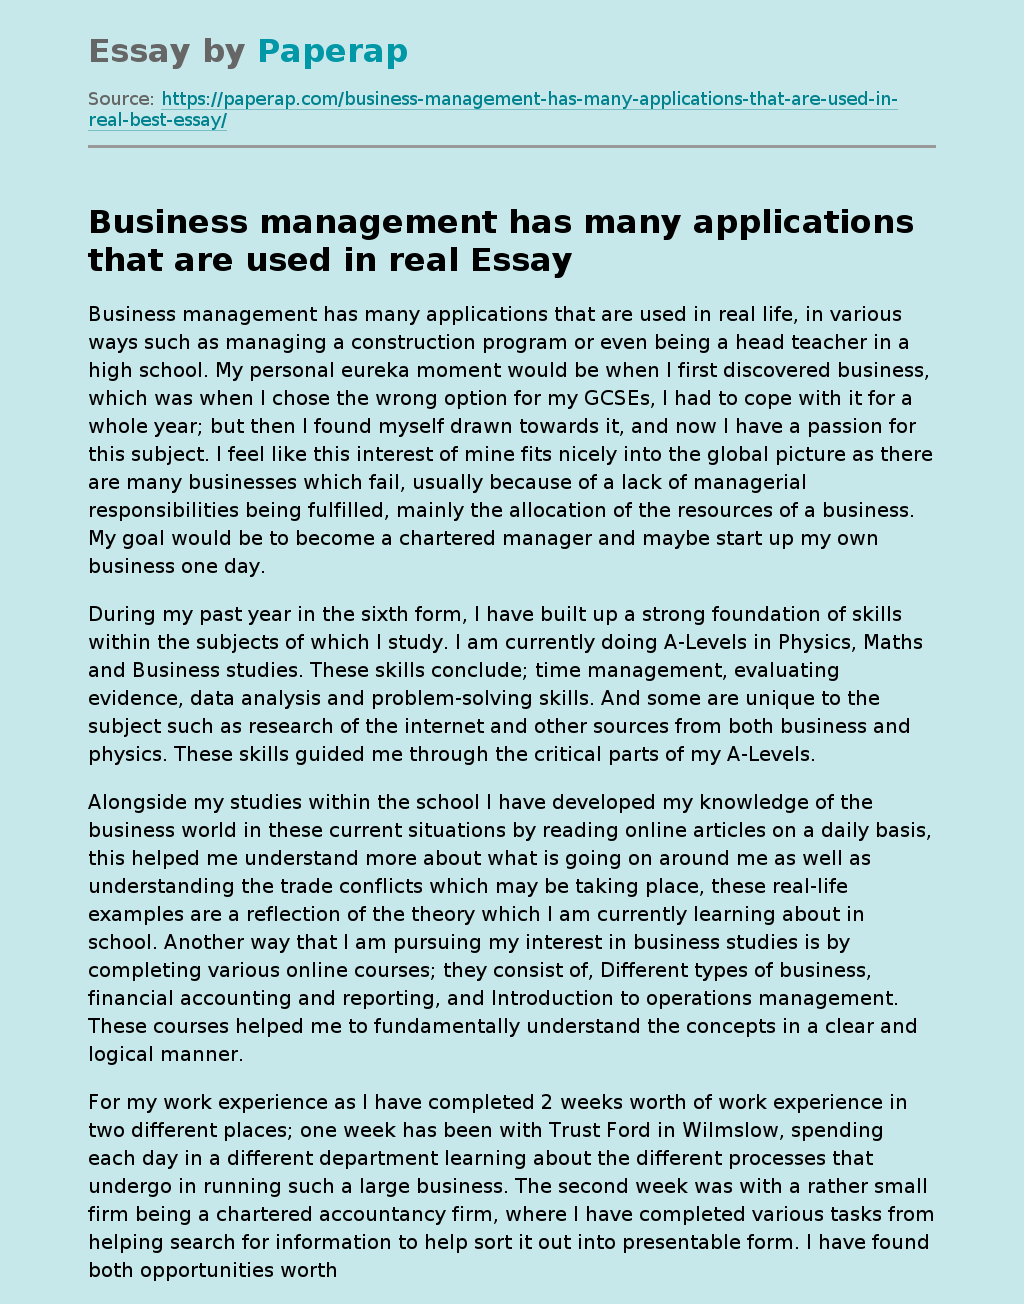 write an essay about business management